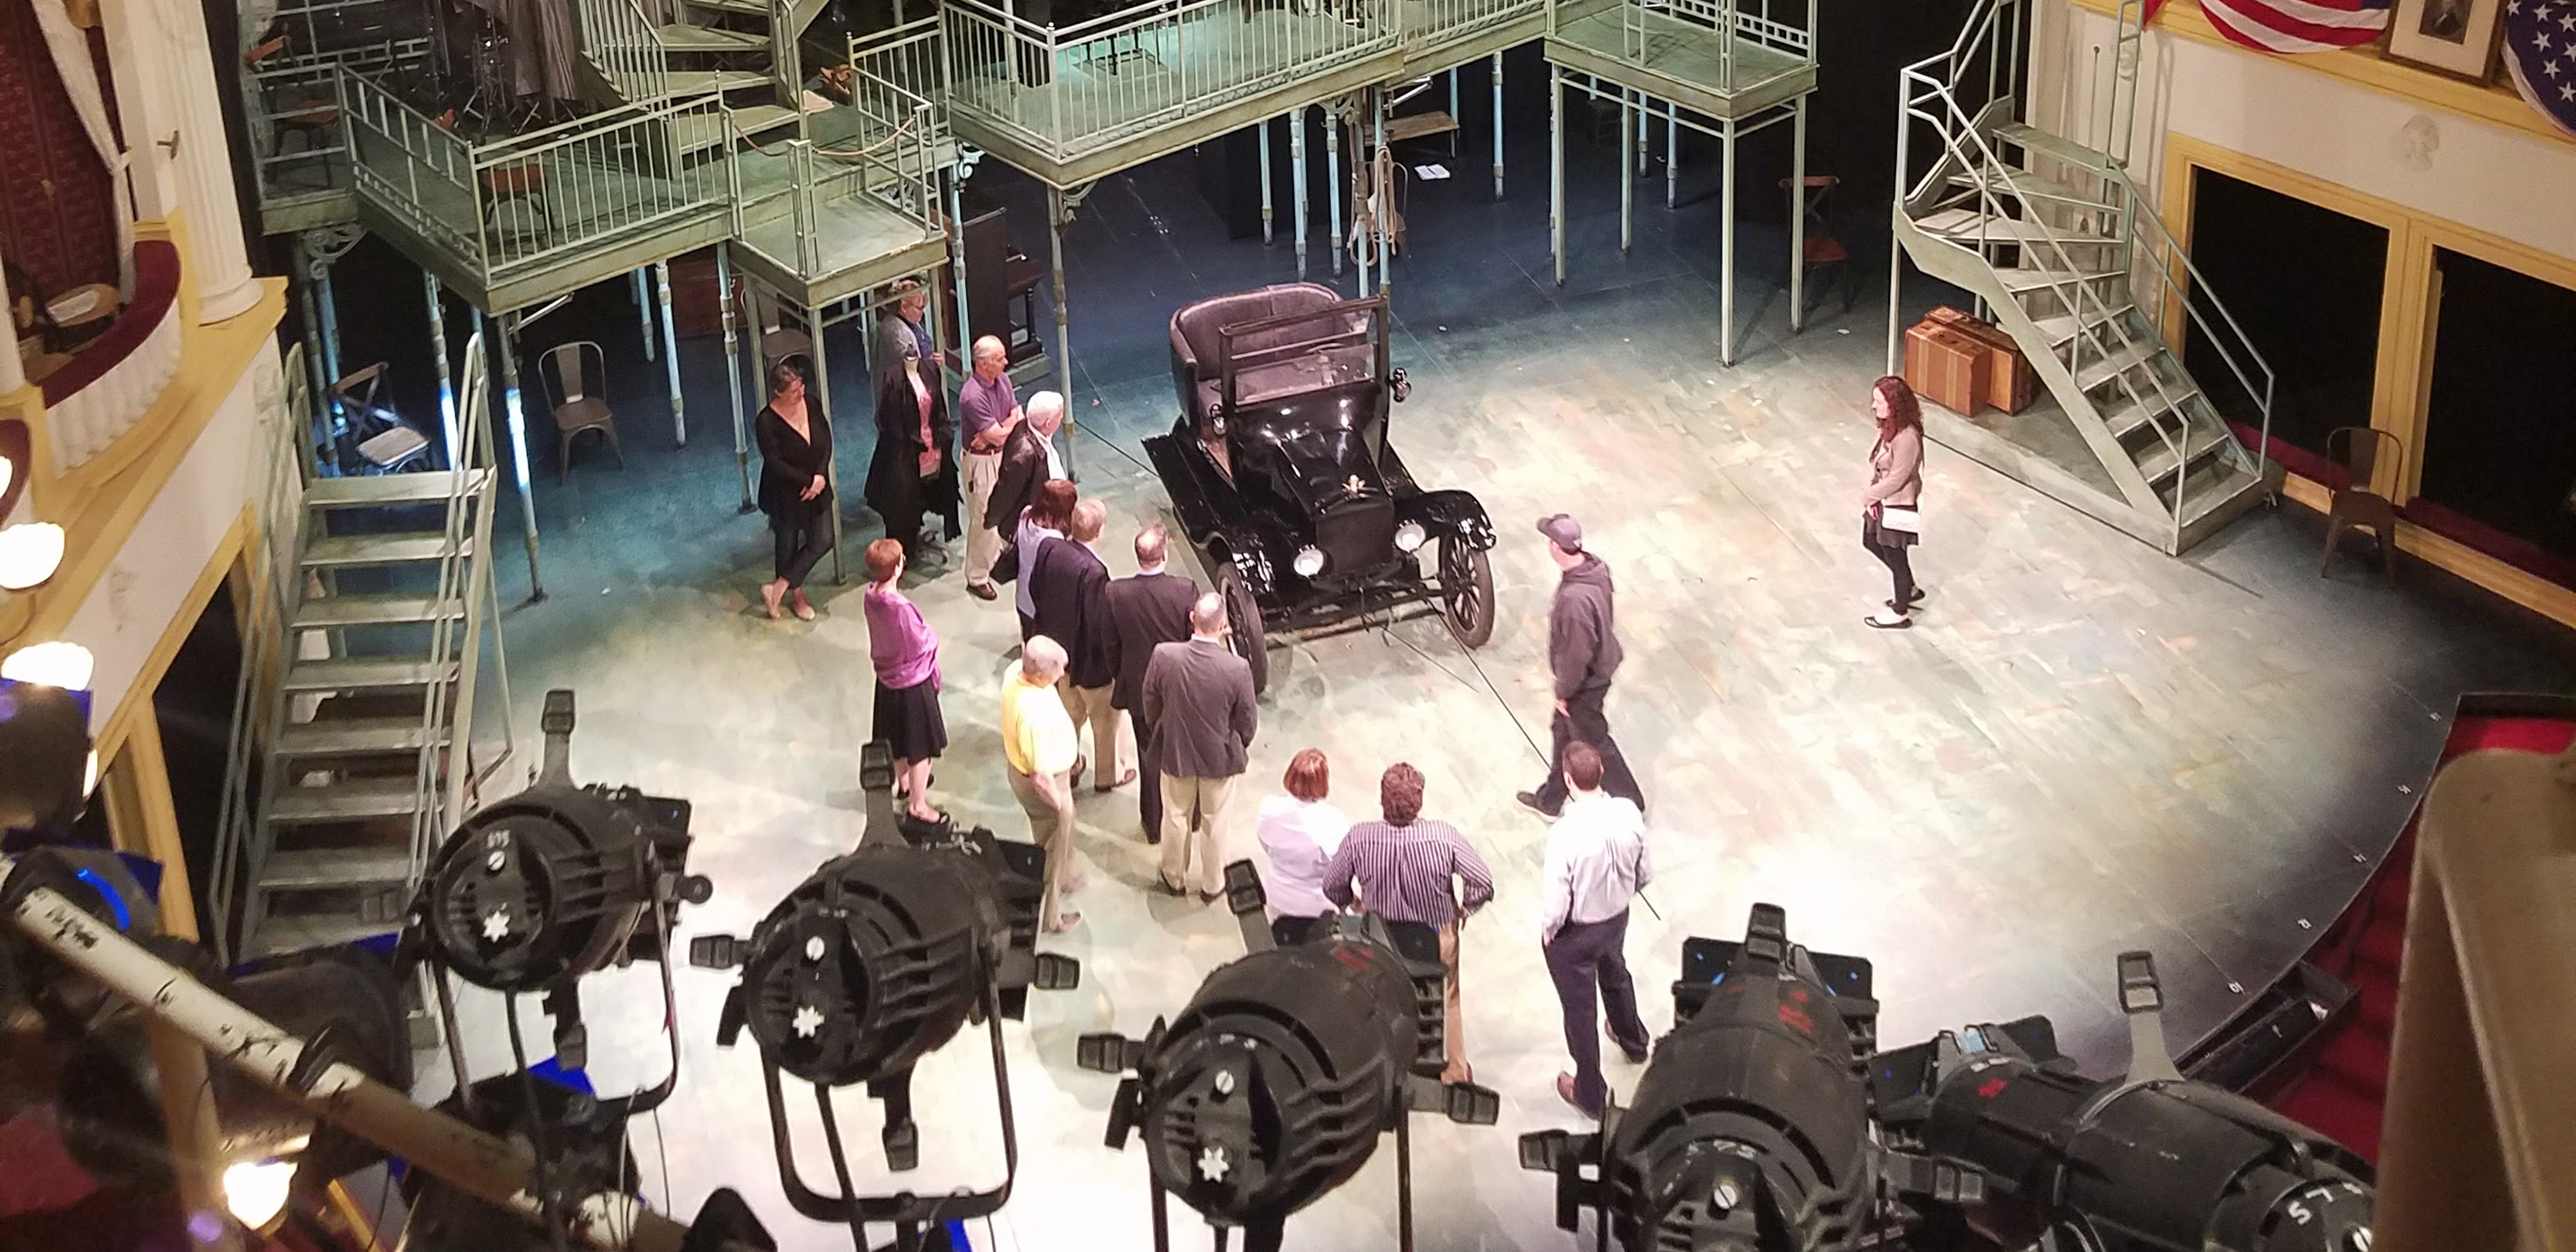 A group of people gather on a stage and examine a replica of an early automobile.